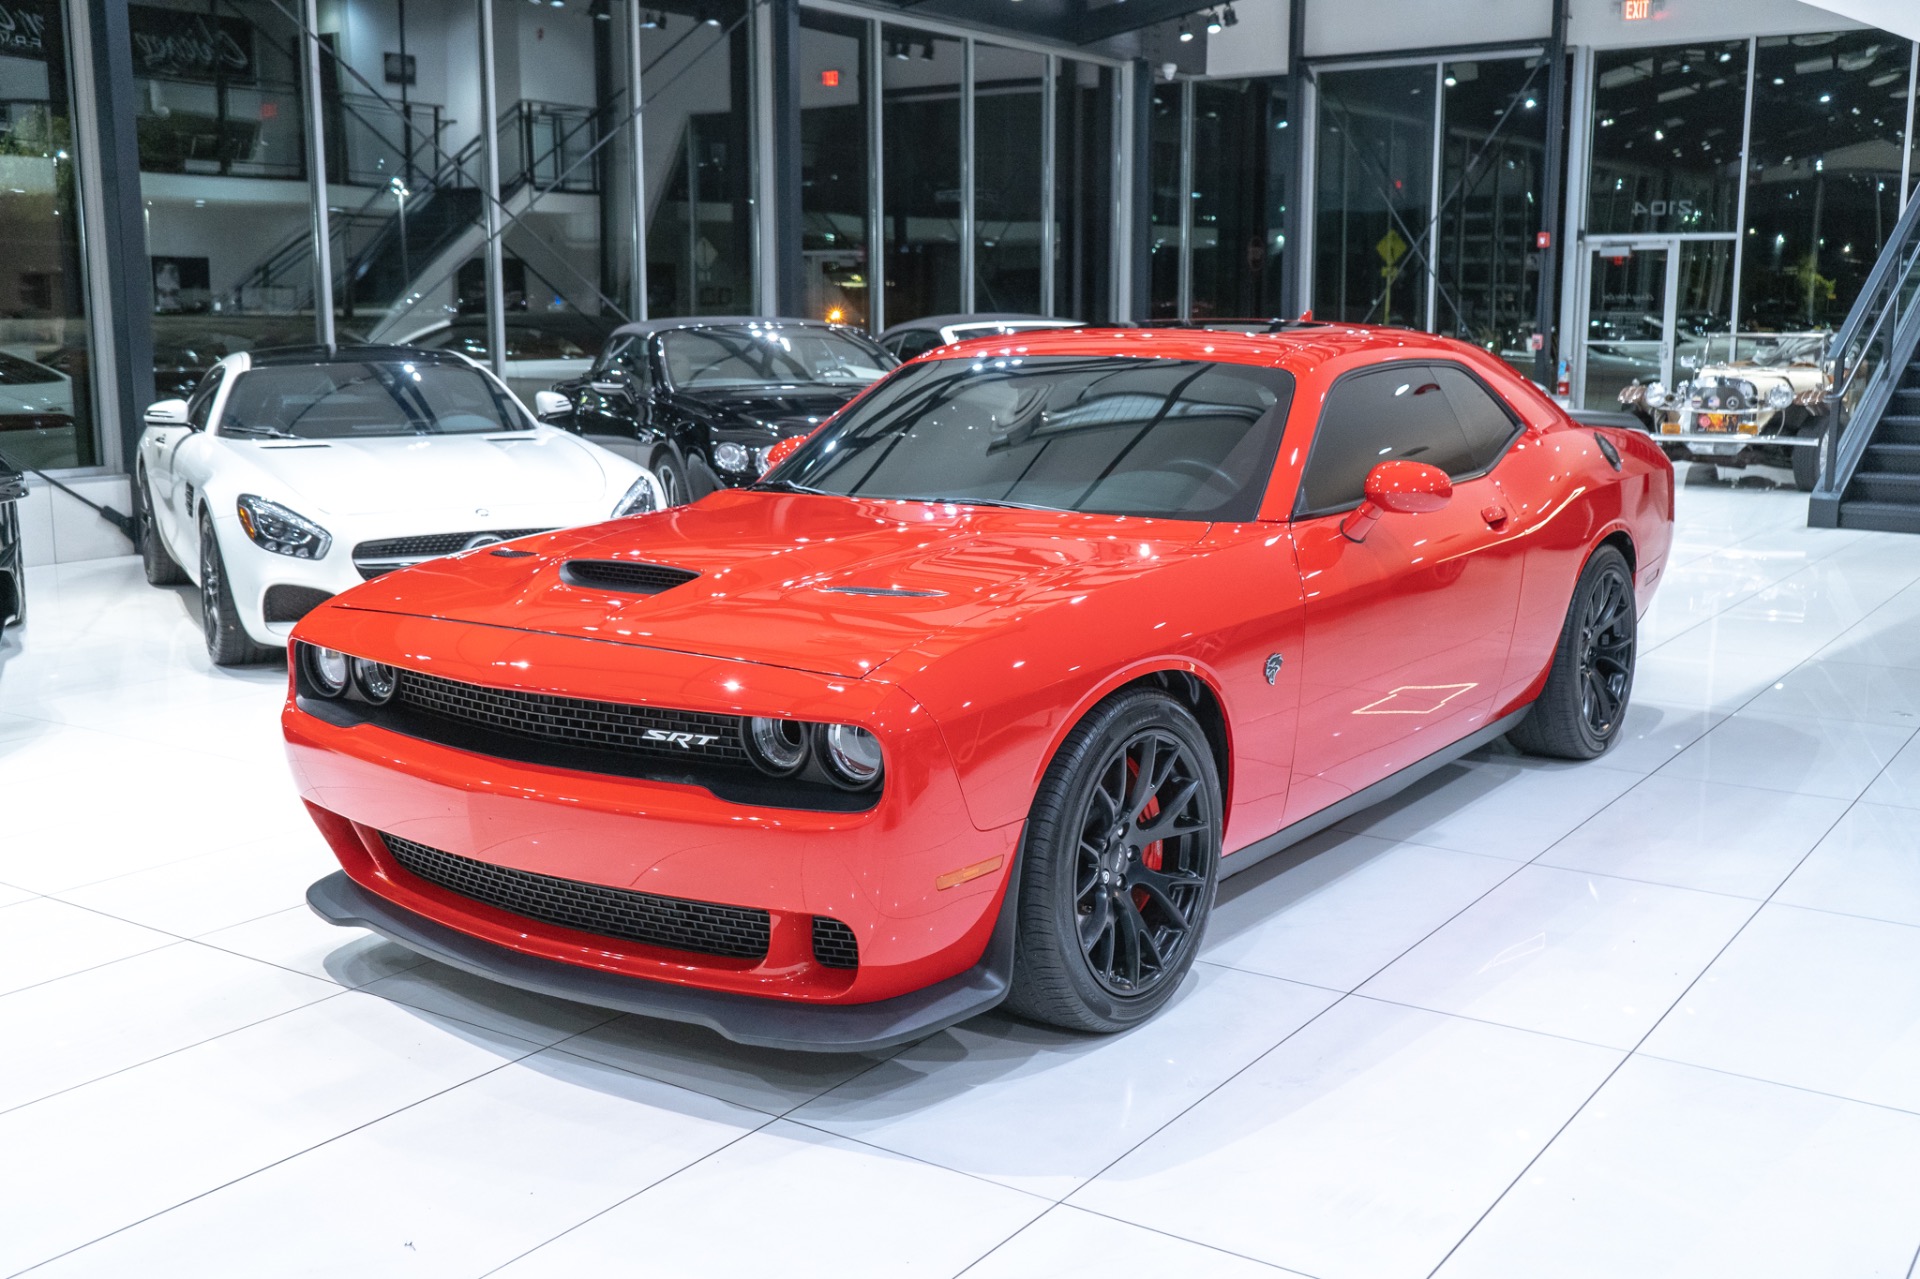 Used-2016-Dodge-Challenger-SRT-Hellcat-Coupe-8-Speed-Auto-Power-Sunroof-Serviced